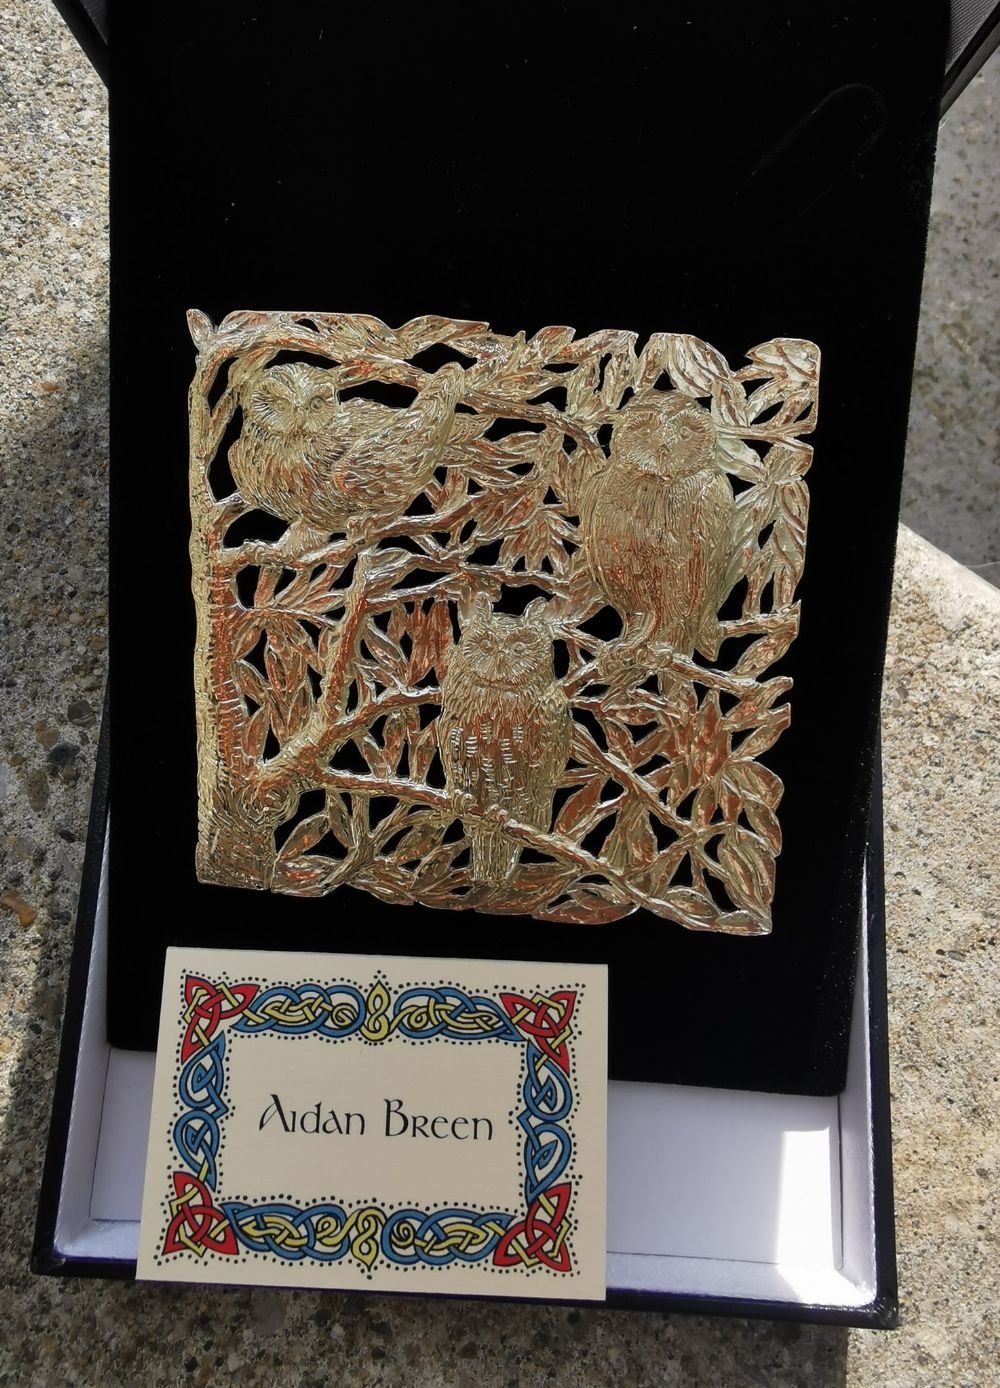 AN AIDAN BREEN THREE OWL BROOCH, handmade in Ireland, with fantastic attention to detail with - Image 5 of 7